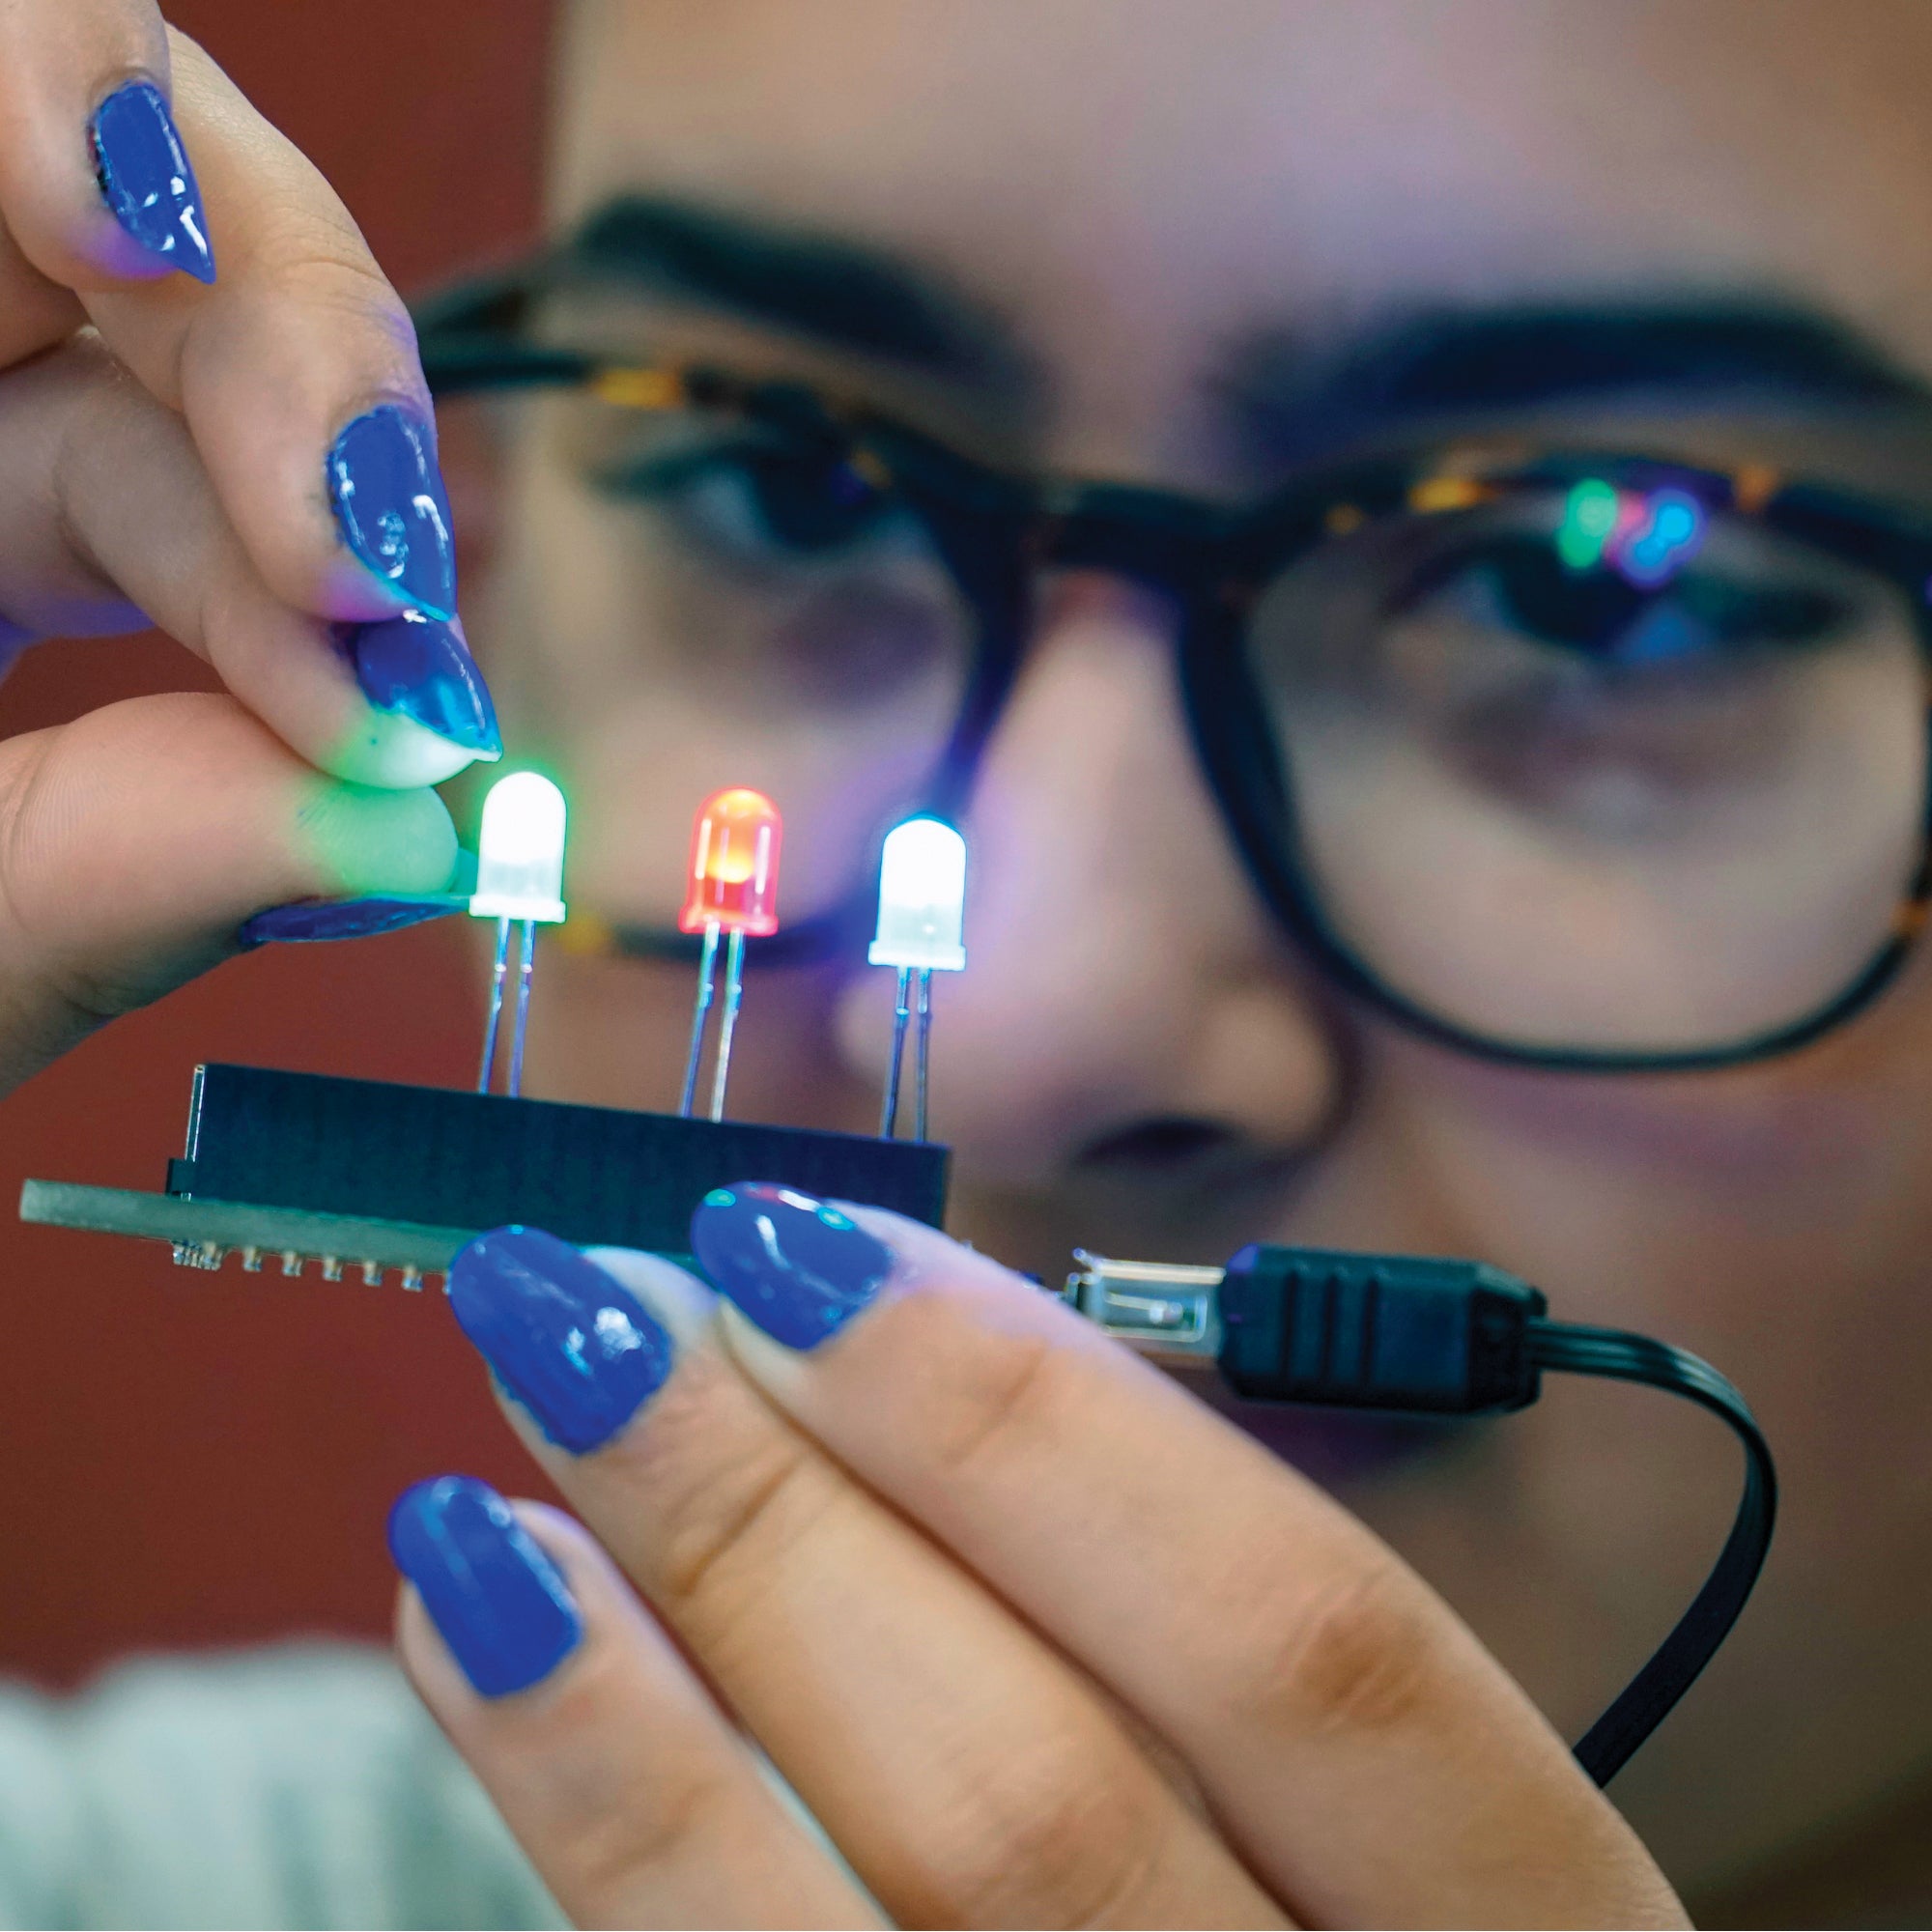 A close up of a teenage girl with glasses holding the Let’s Start Coding Maker (circuit) Board. She is holding the Maker Board in her left hand while her right hand is pinching toward the green L E D light attached. There is a green, red, and whitish-blue L E D light plugged in and lit up.